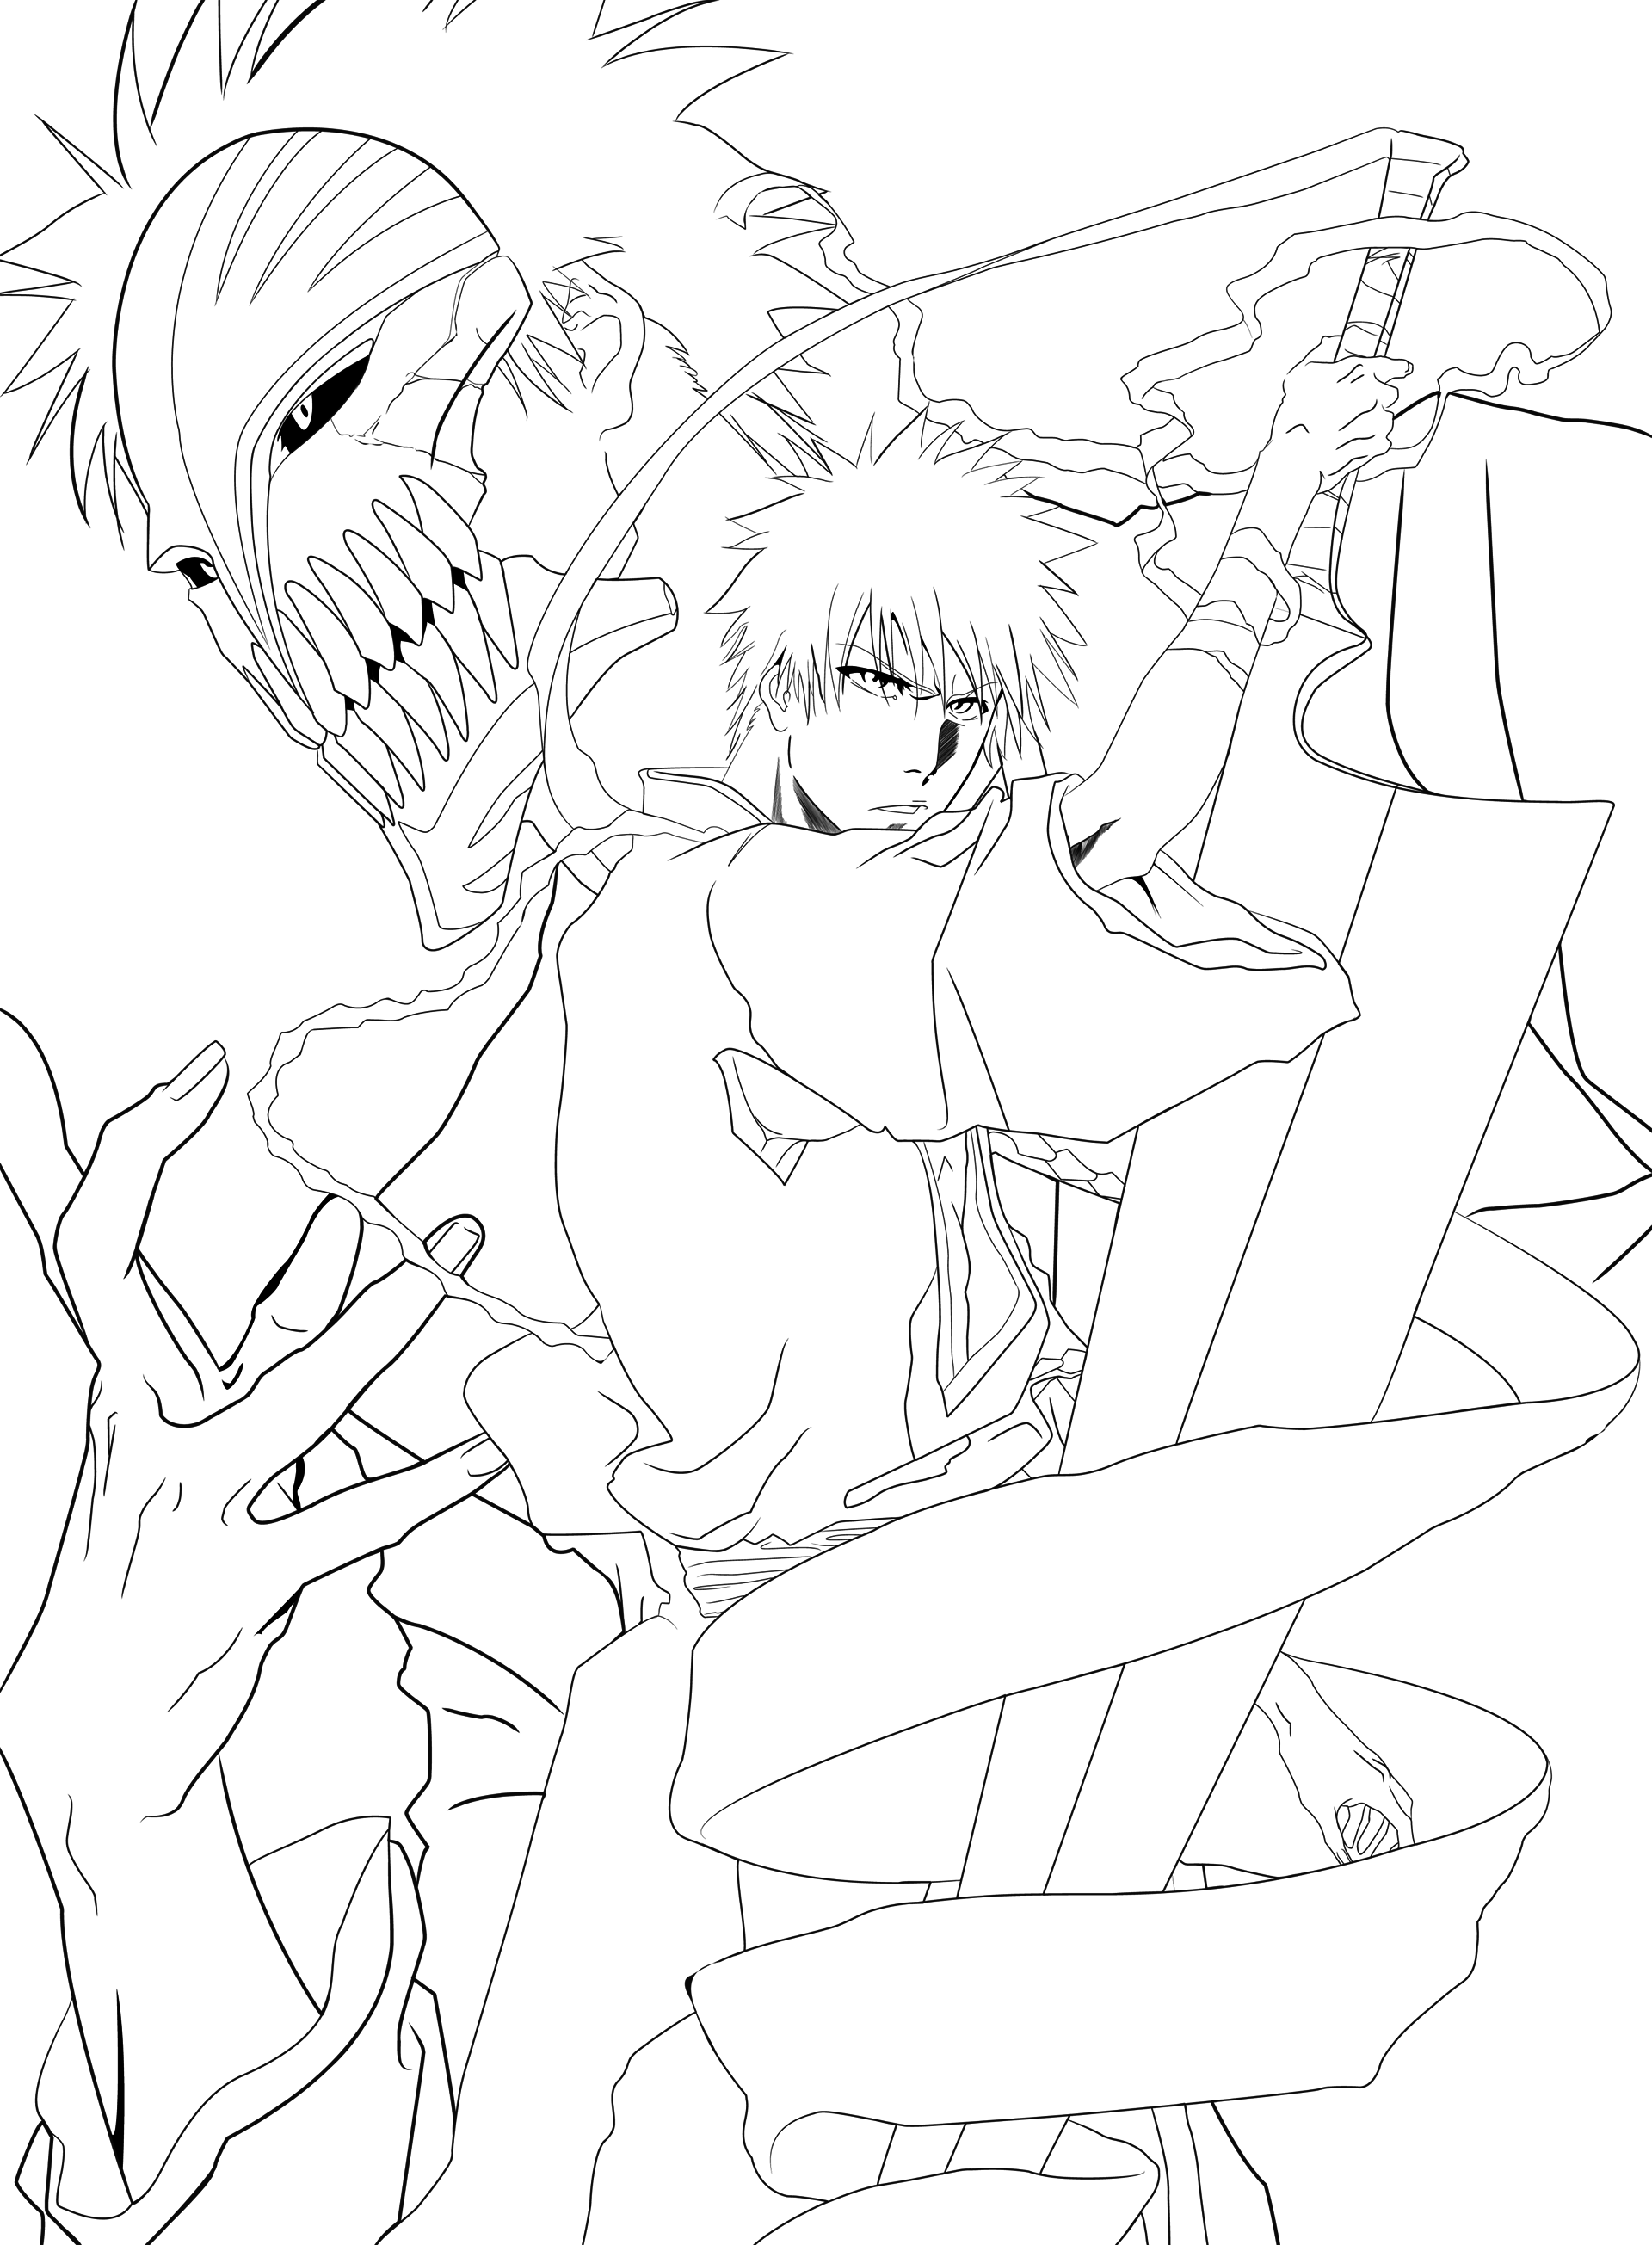 Im so printing this out and coloring it later manga coloring book bleach drawing detailed coloring pages